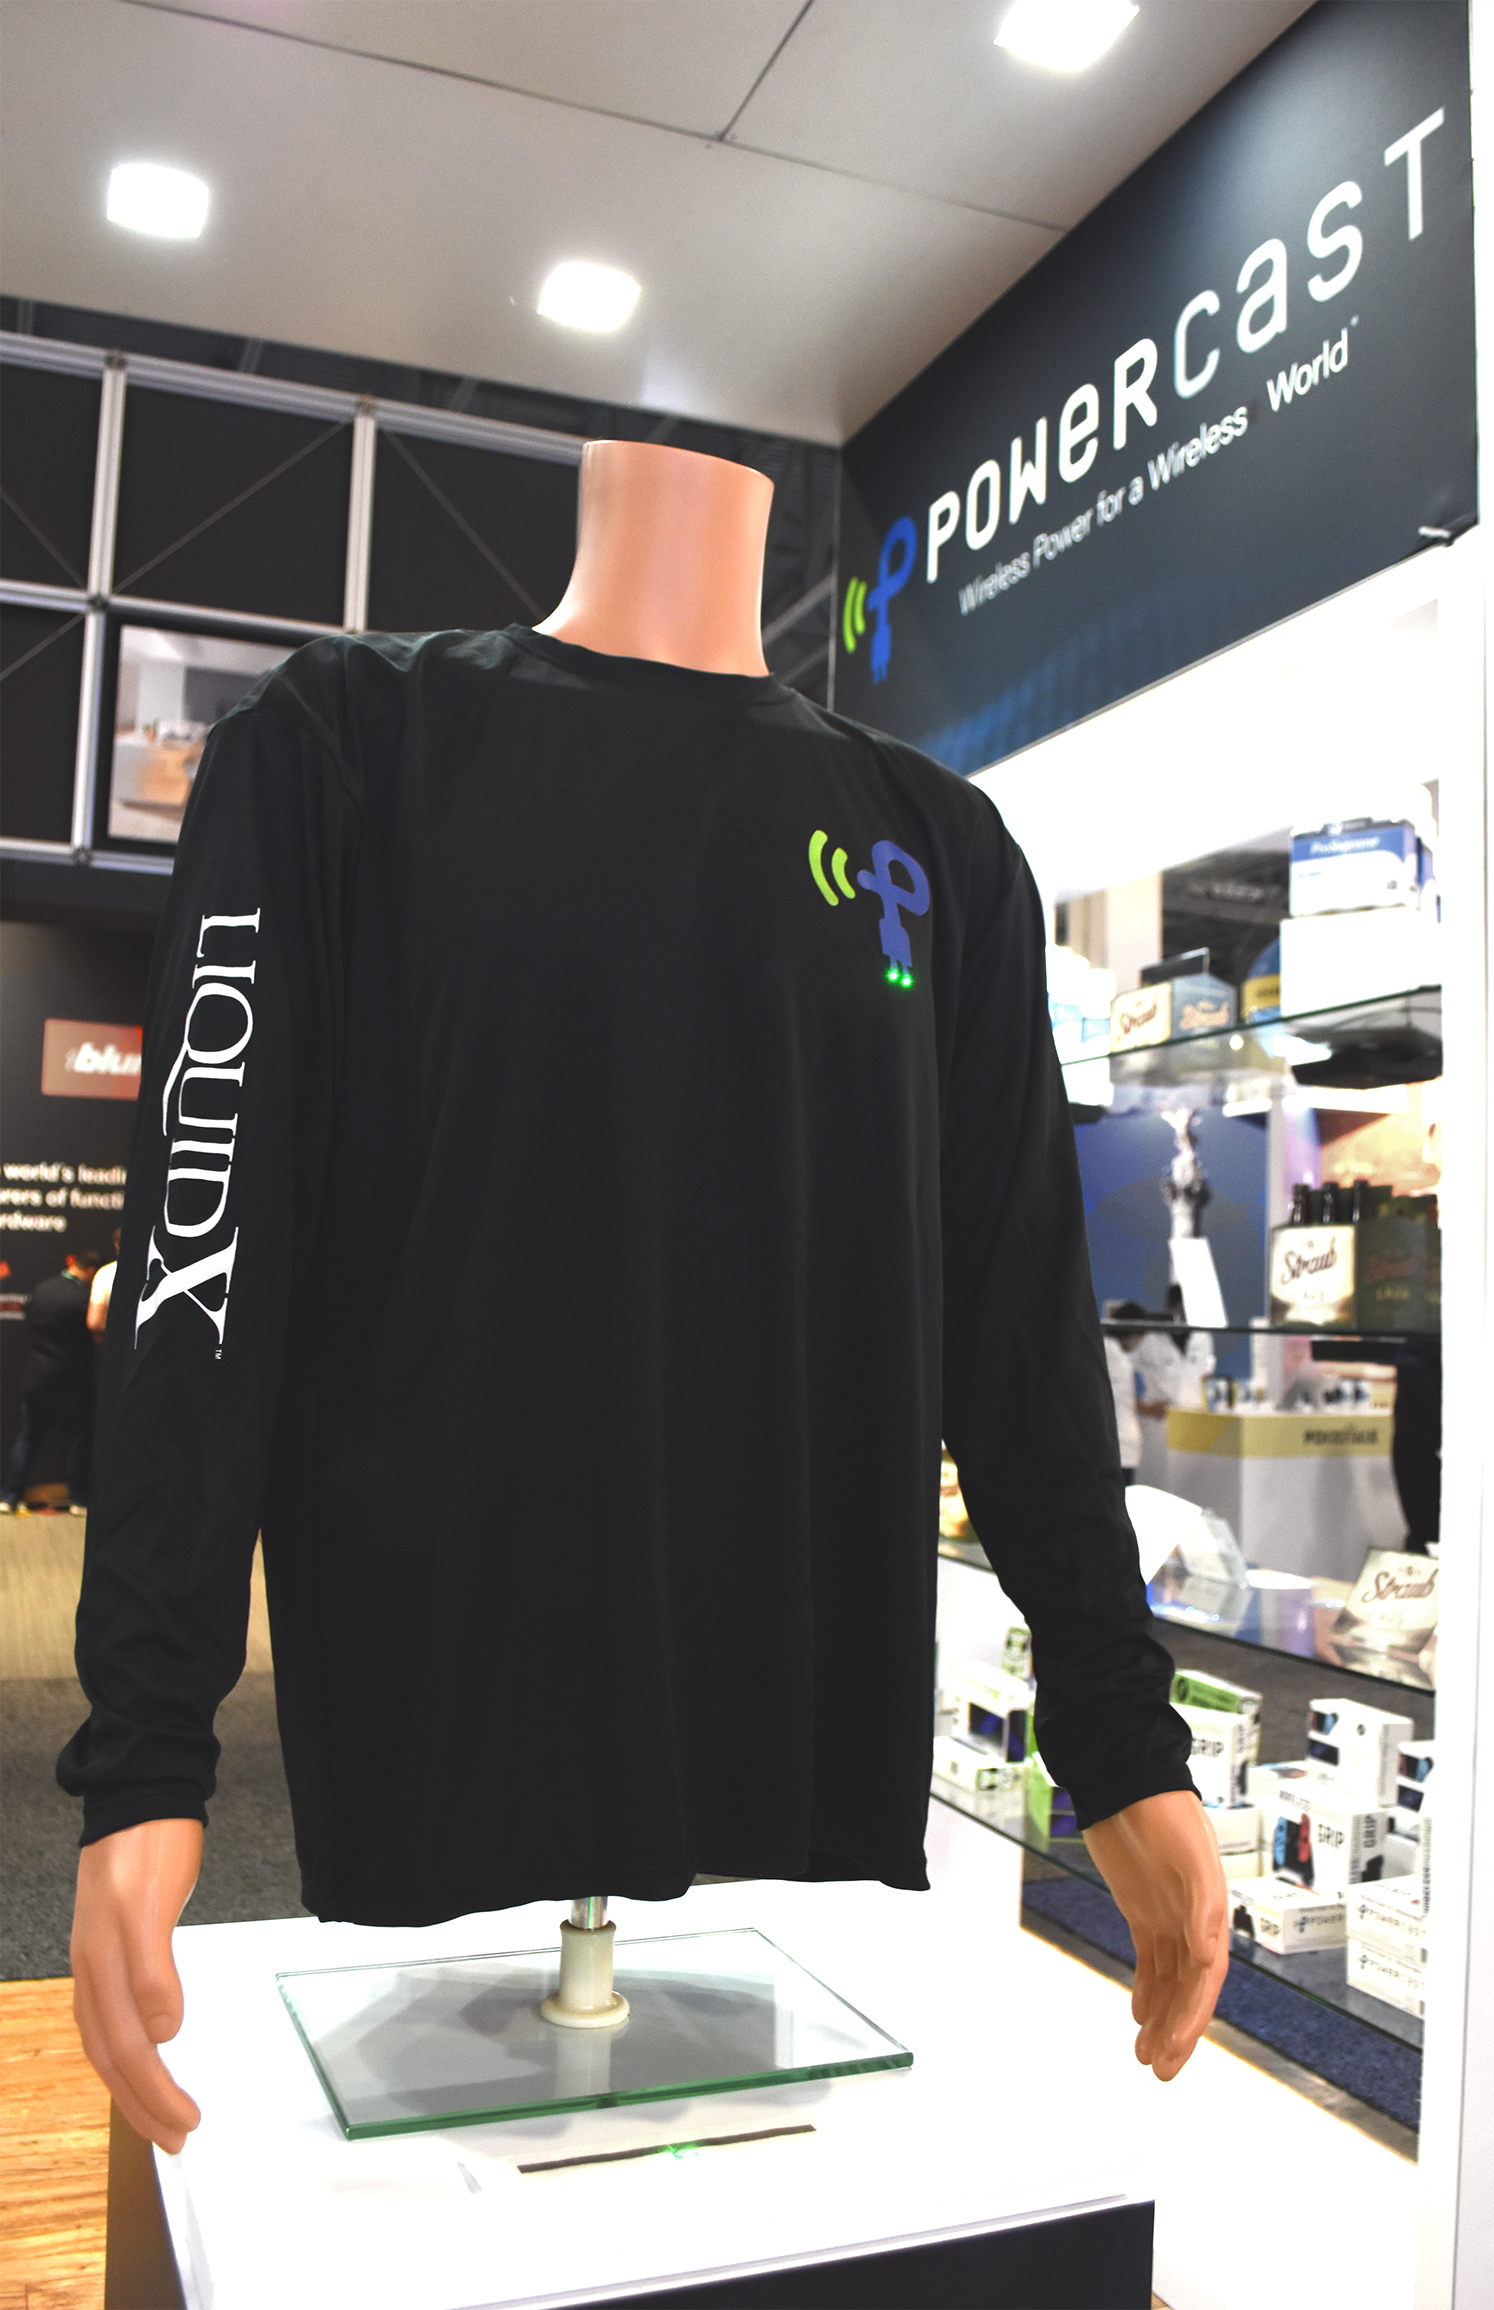 Powercast and Liquid X showcased at CES in January 2020 a wirelessly rechargeable smart athletic shirt prototype that illuminates using printed electronics and LEDs powered over the air.